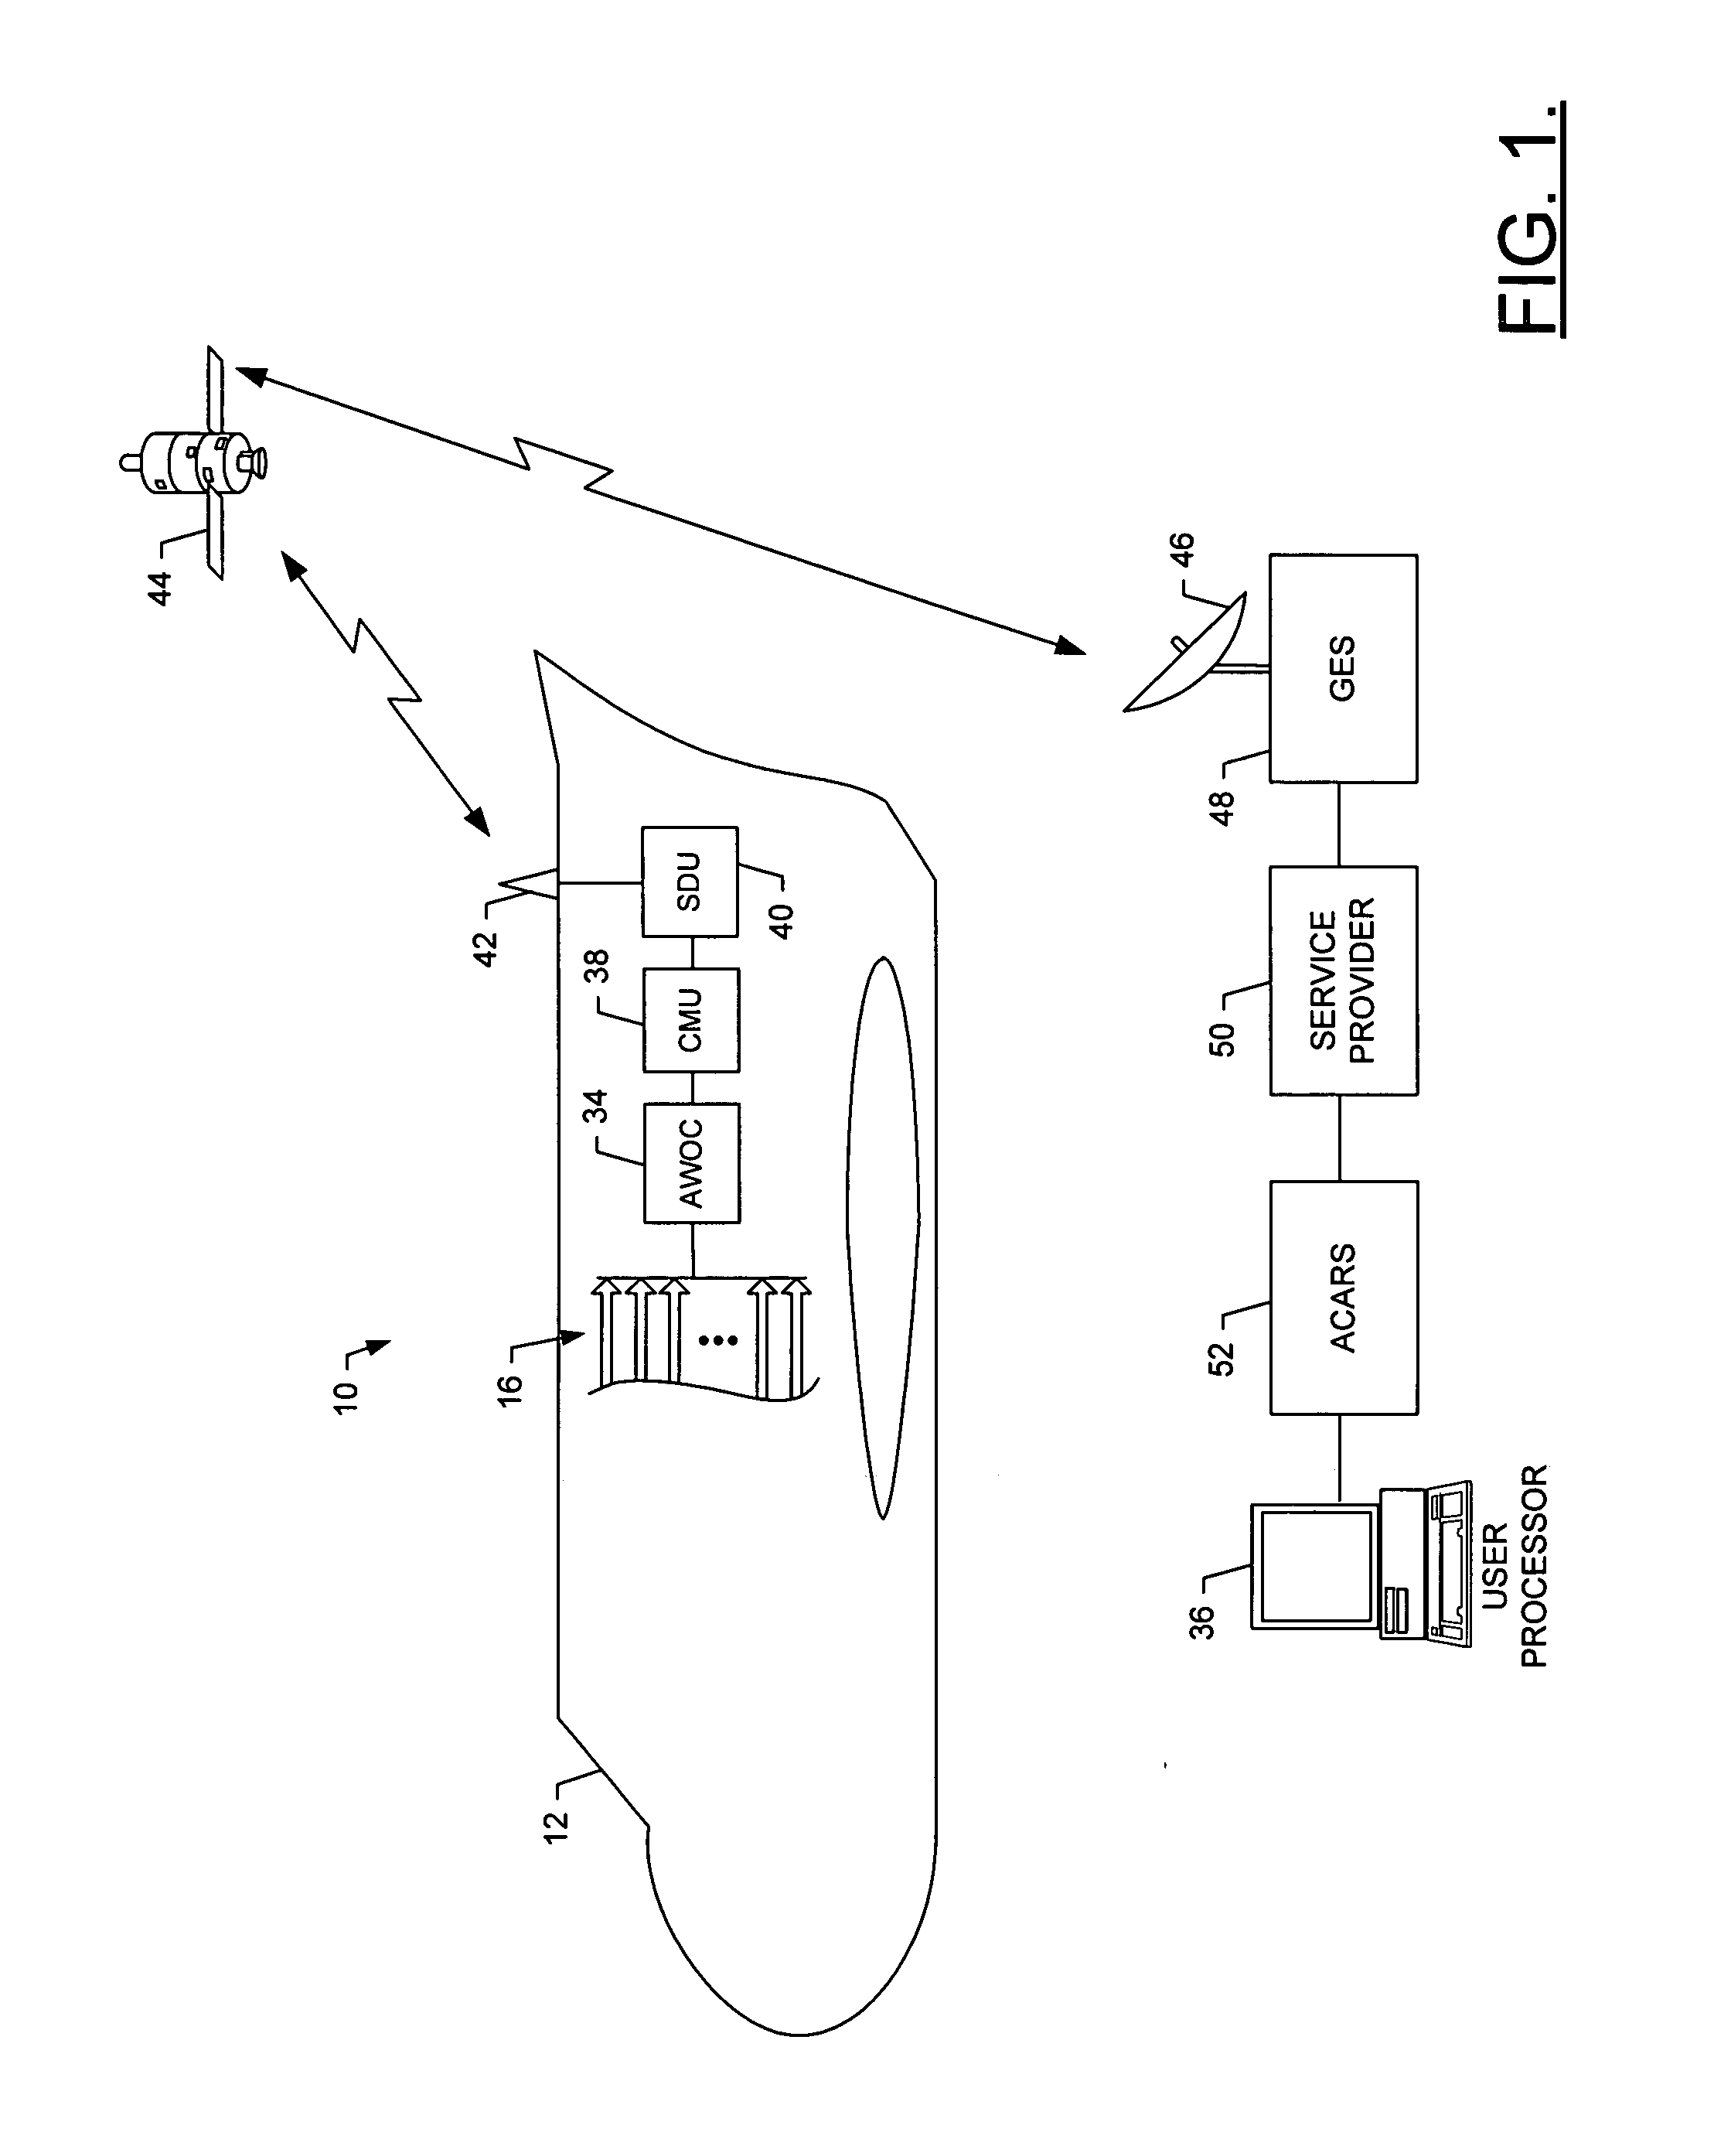 System, method and computer program product for real-time event indentification and course of action interpretation